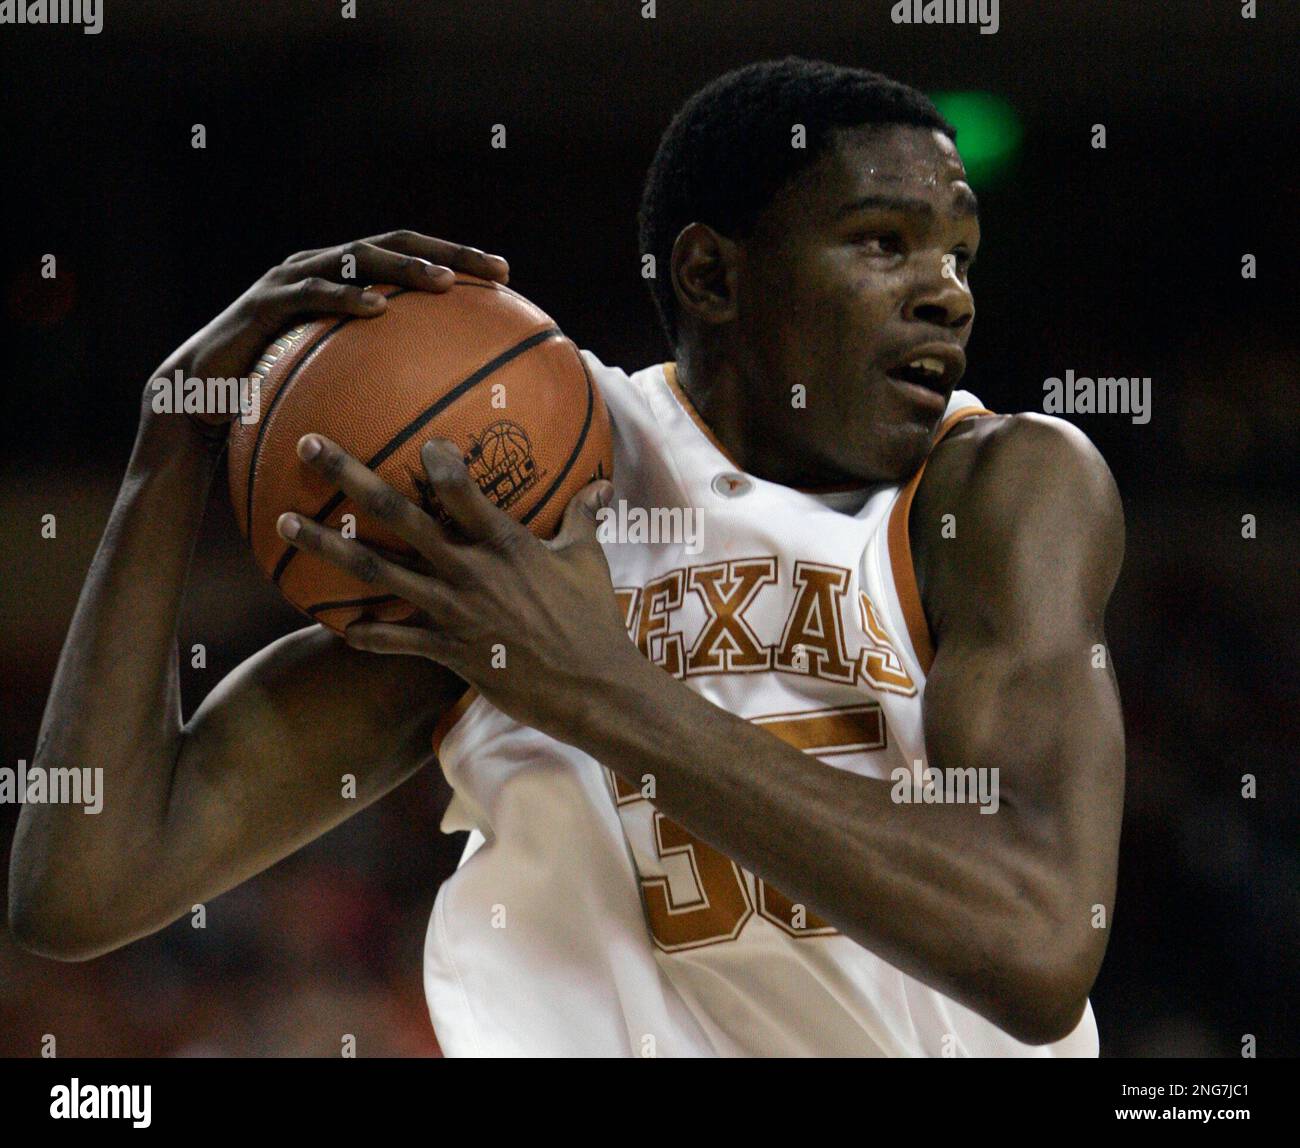 Texas forward Kevin Durant (35) is shown during first half action in their college basketball game Friday, Nov. 10, 2006, in Austin, Texas. (AP Photo/Harry Cabluck) Stock Photo